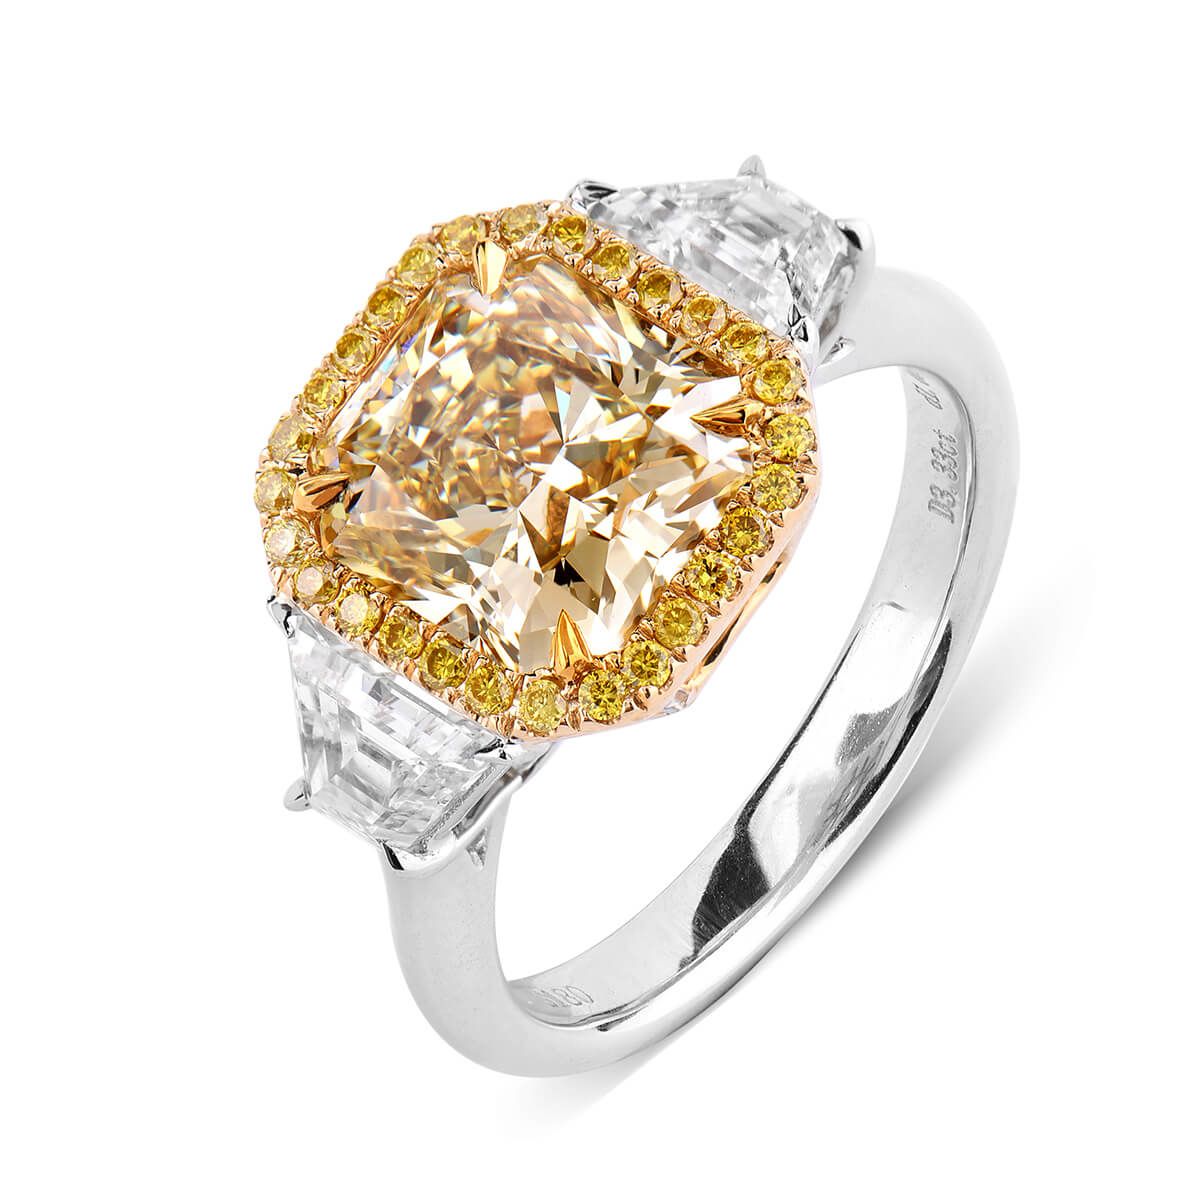 Fancy Yellow Diamond Ring, 3.33 Ct. (4.39 Ct. TW), Radiant shape, GIA Certified, 1182682311